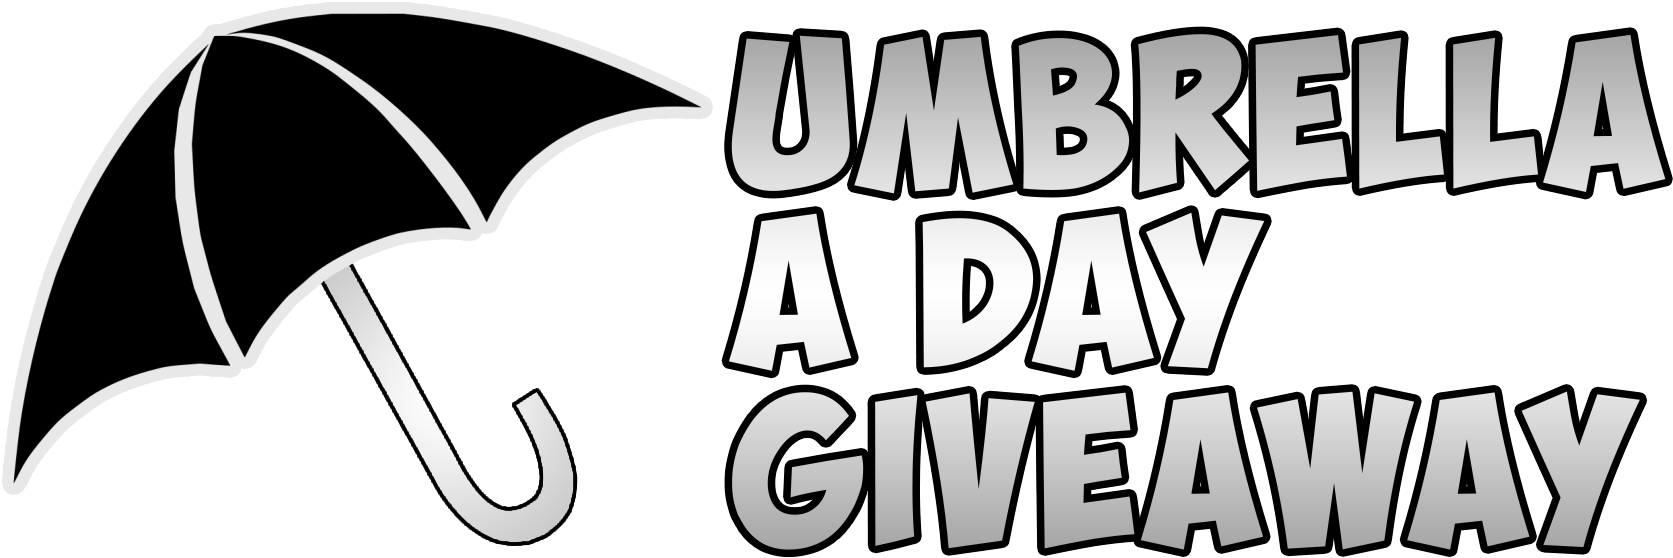 Umbrella A Day Giveaway PNG image